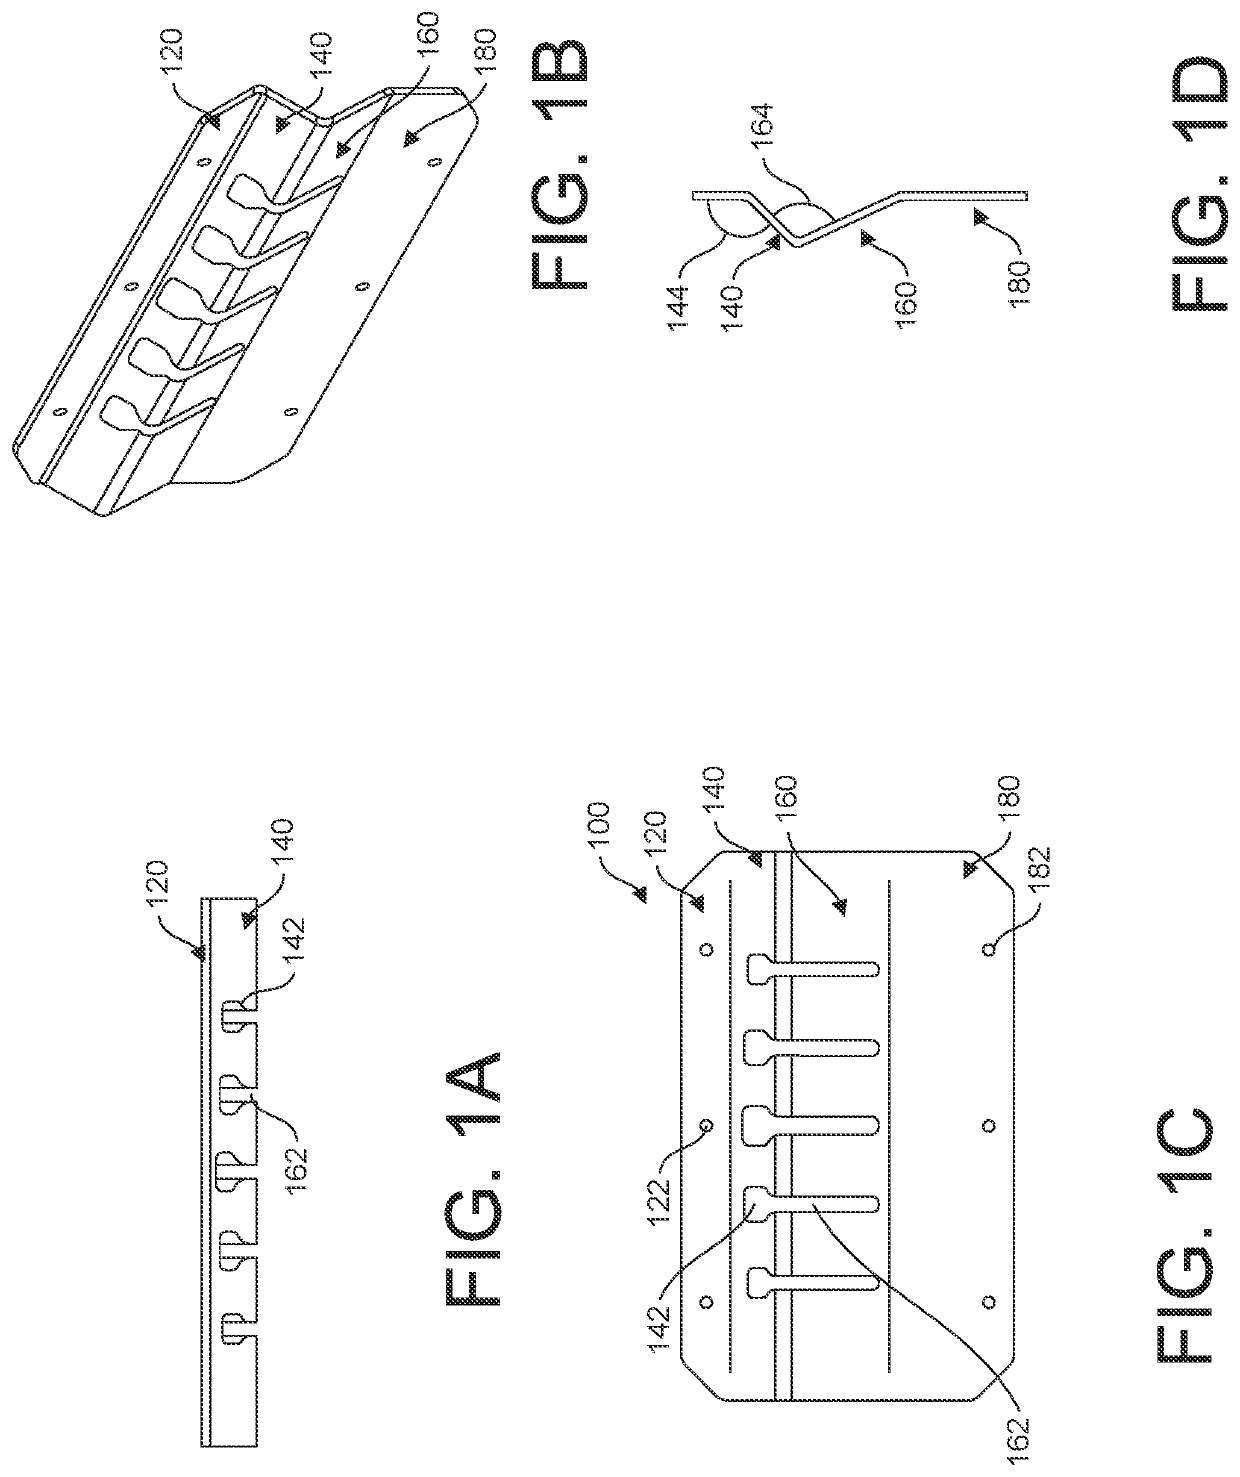 Systems and Methods for Improved Bucker Insertion